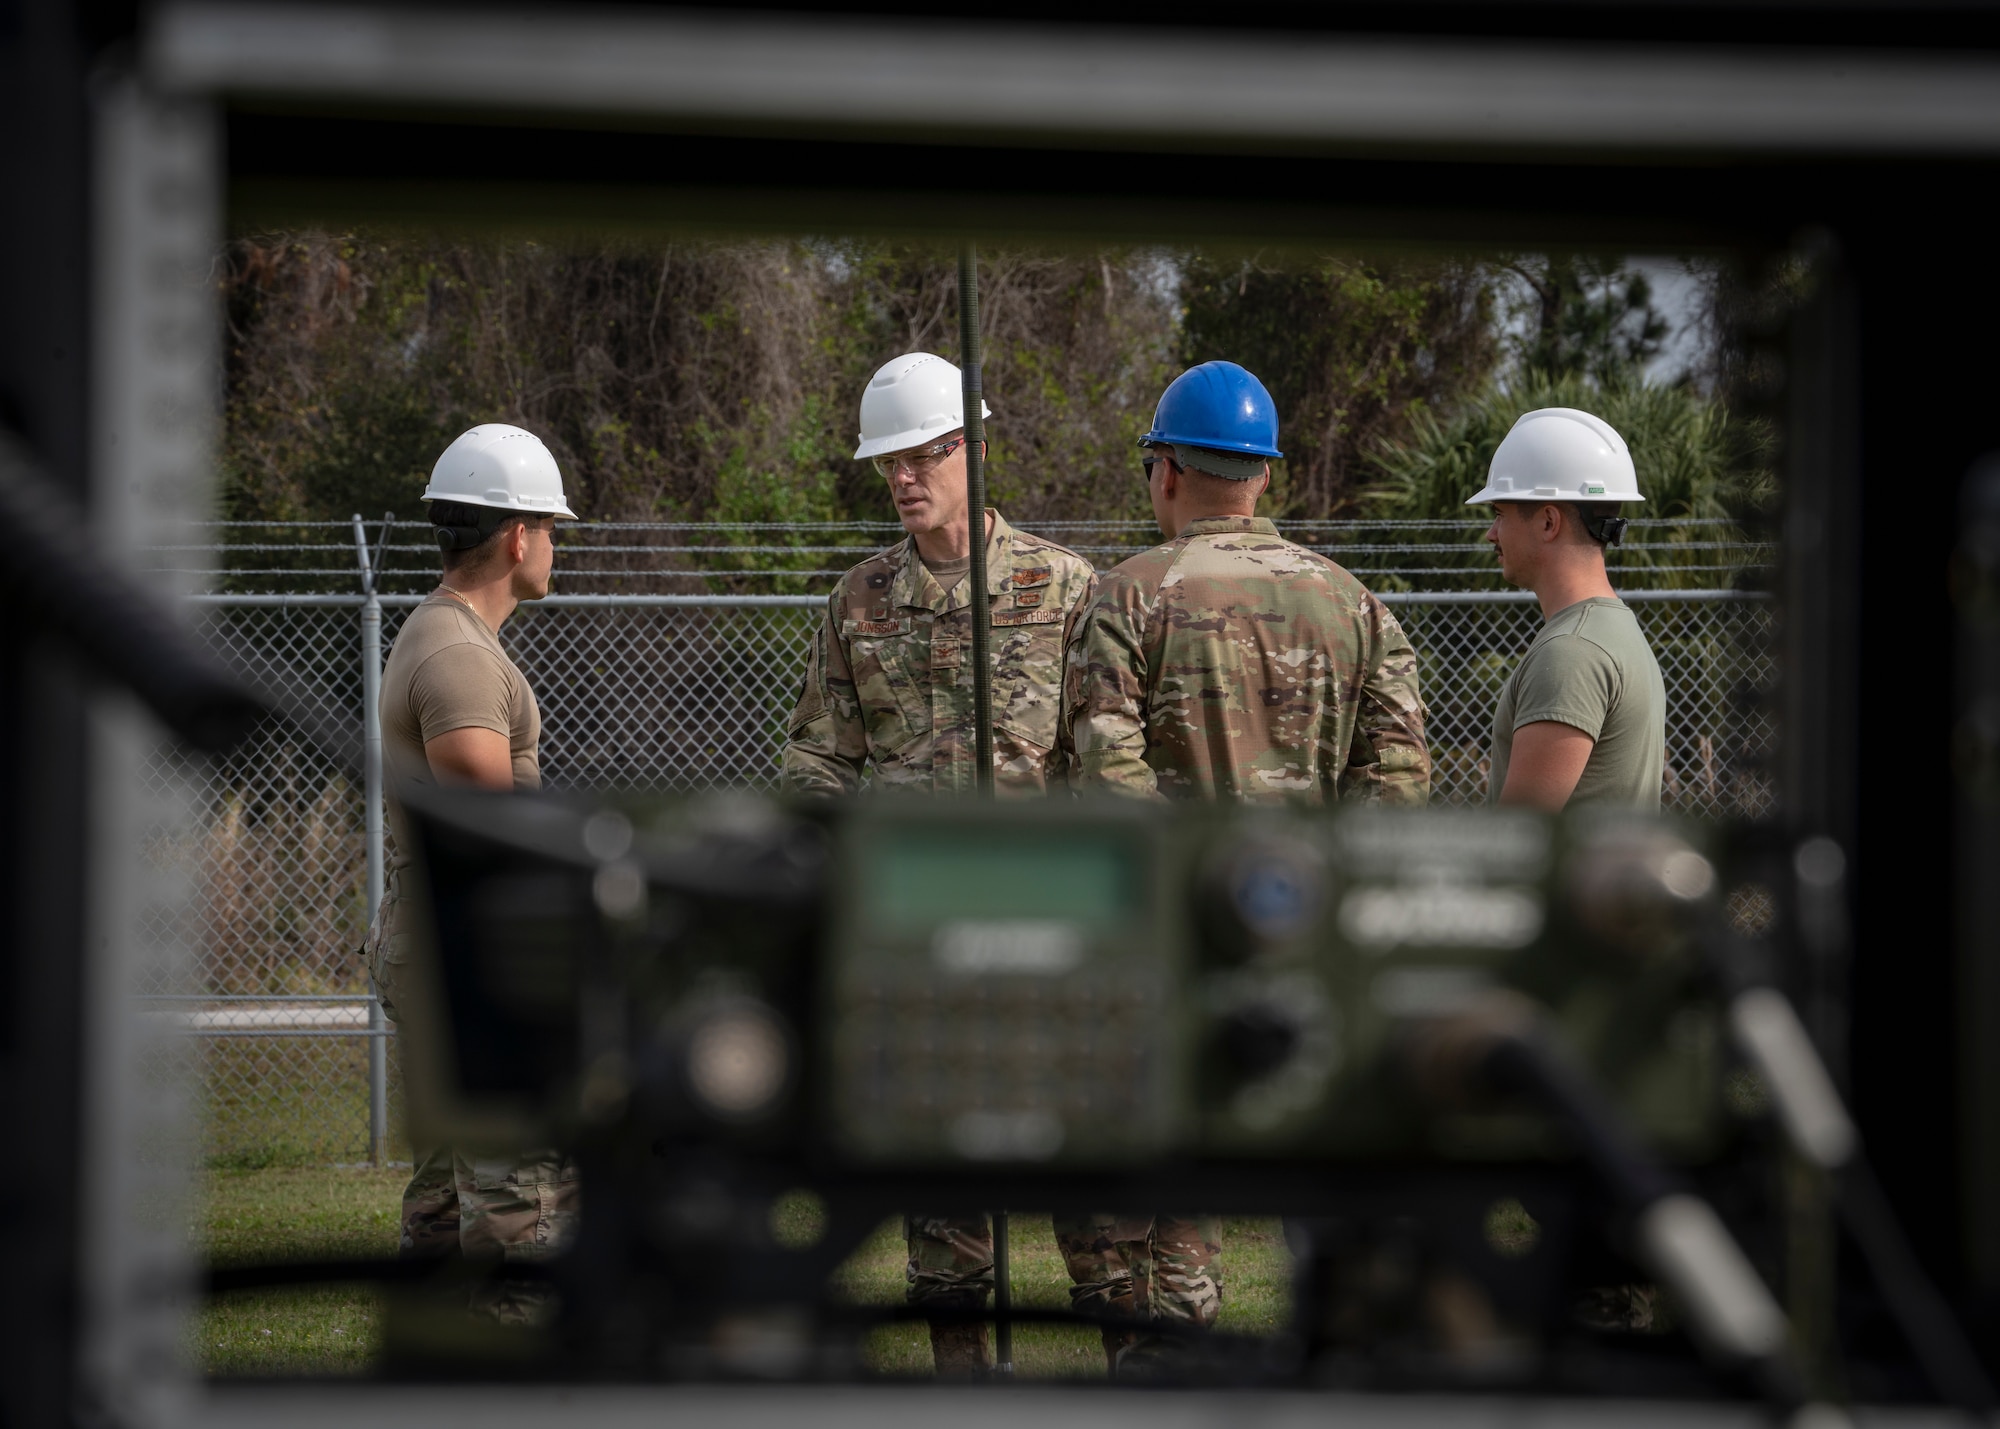 U.S. Air Force Col. Benjamin Jonsson, 6th Air Refueling Wing commander, visits with Radio Frequency Transmission Systems (RFTS) technicians assigned to the 6th Communications Squadron at MacDill Air Force Base, Florida, March. 10, 2022.